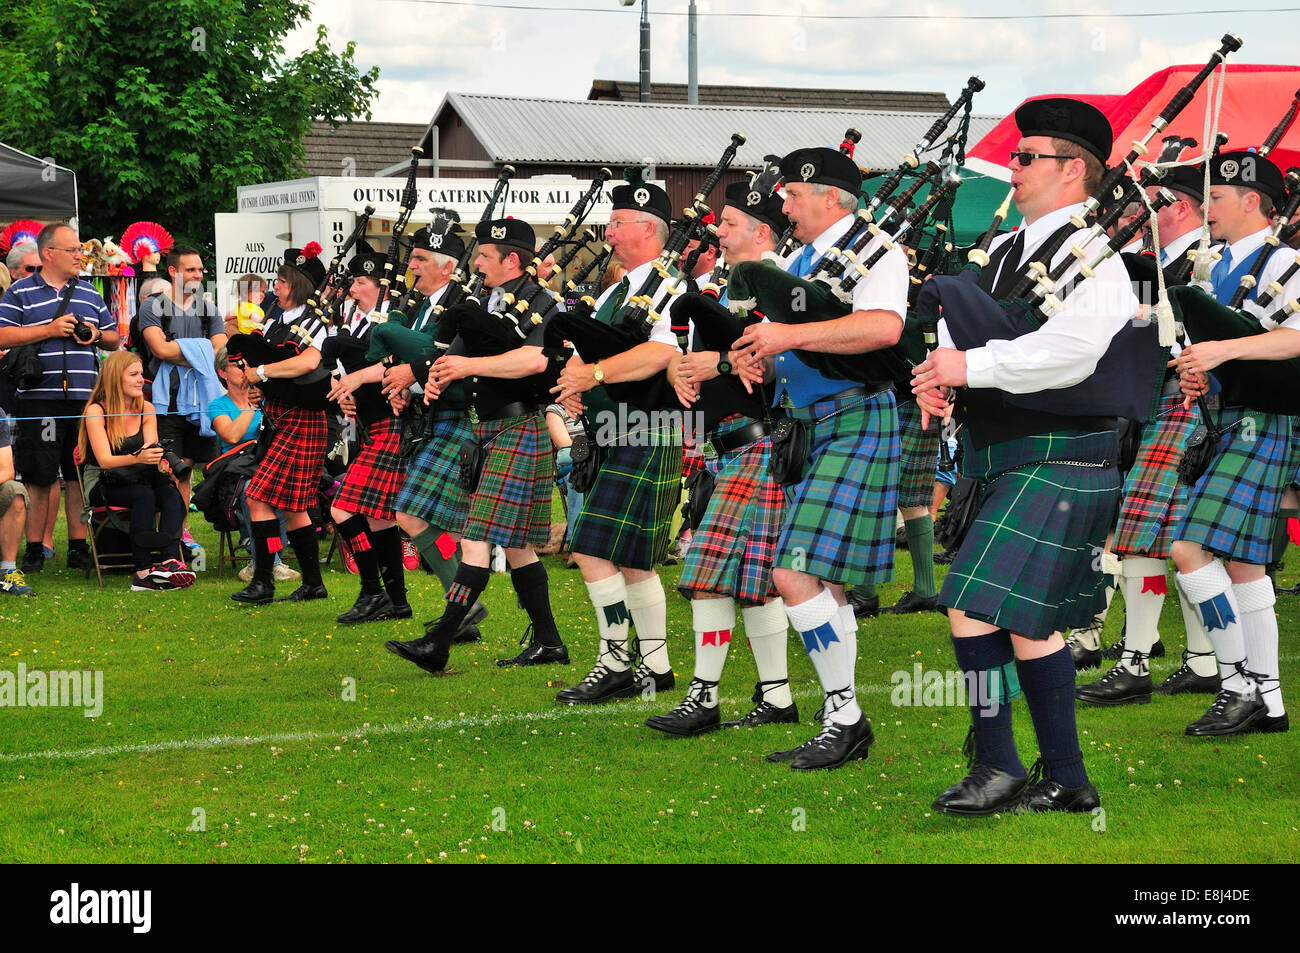 Pipe band marching in unison on the sports ground at the Highland Games, Dufftown, Moray, Highlands, Scotland, United Kingdom Stock Photo